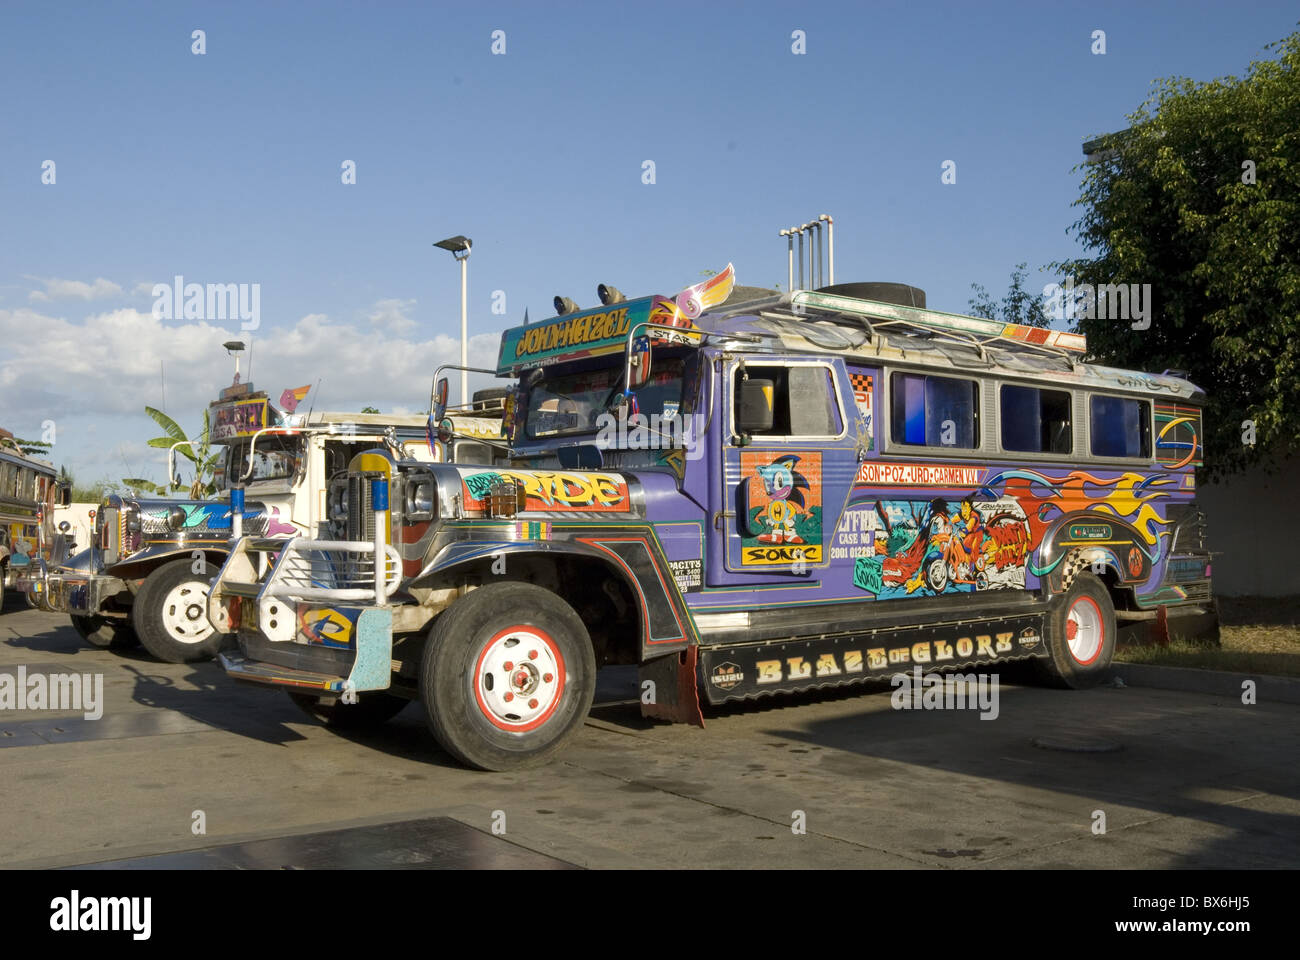 Typical painted jeepney (local bus), Urdaneta, northern Luzon, Philippines, Southeast Asia, Asia Stock Photo